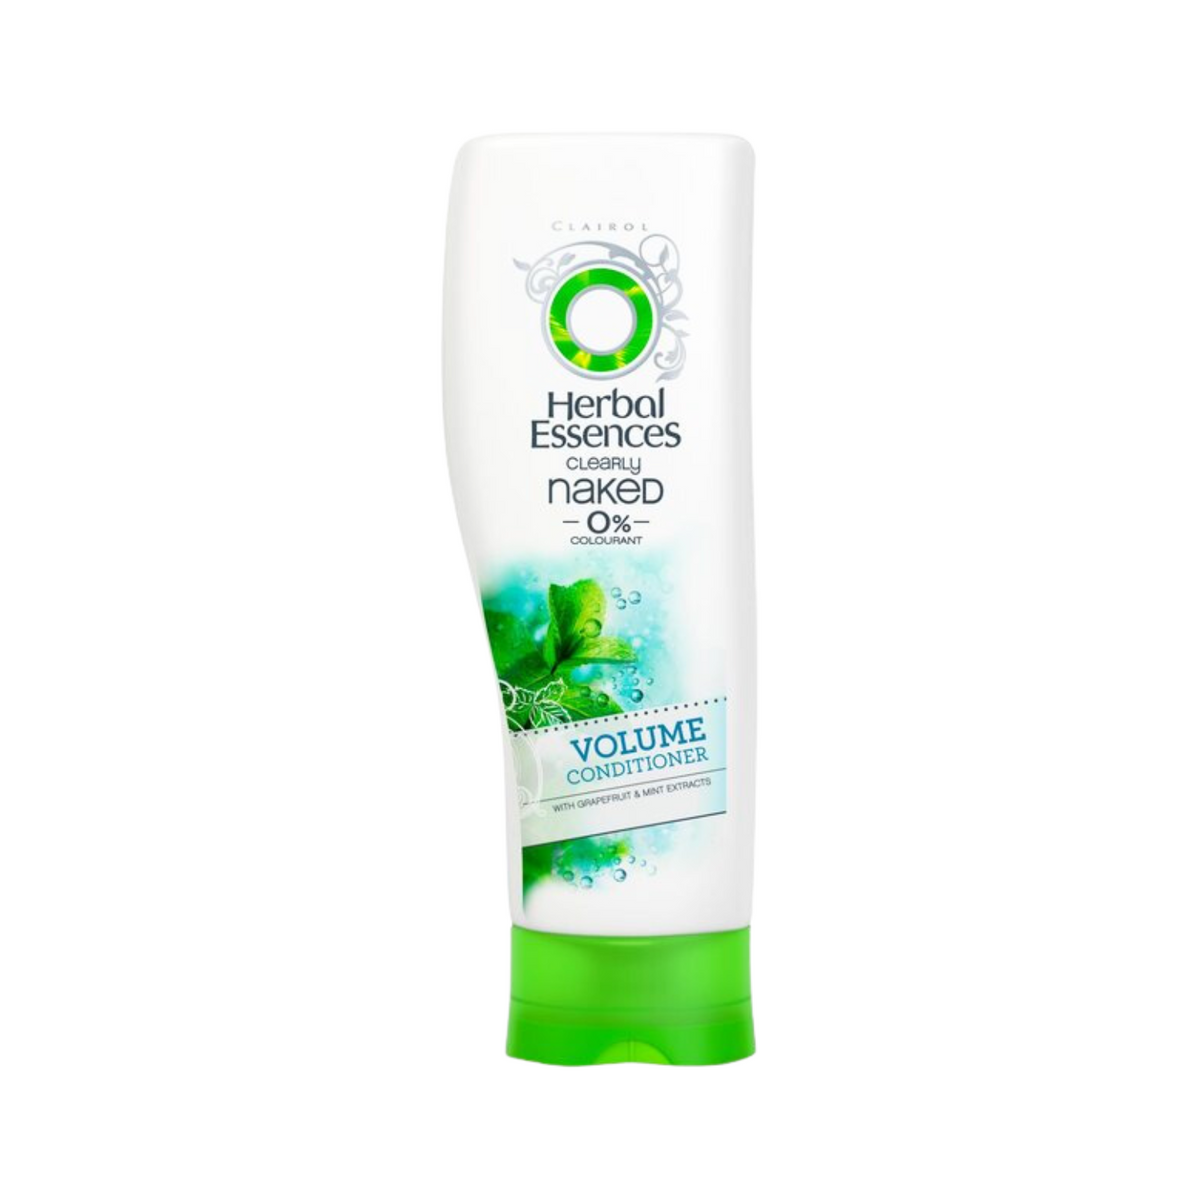 herbal-essences-clearly-naked-0-colourants-volume-conditioner-400ml